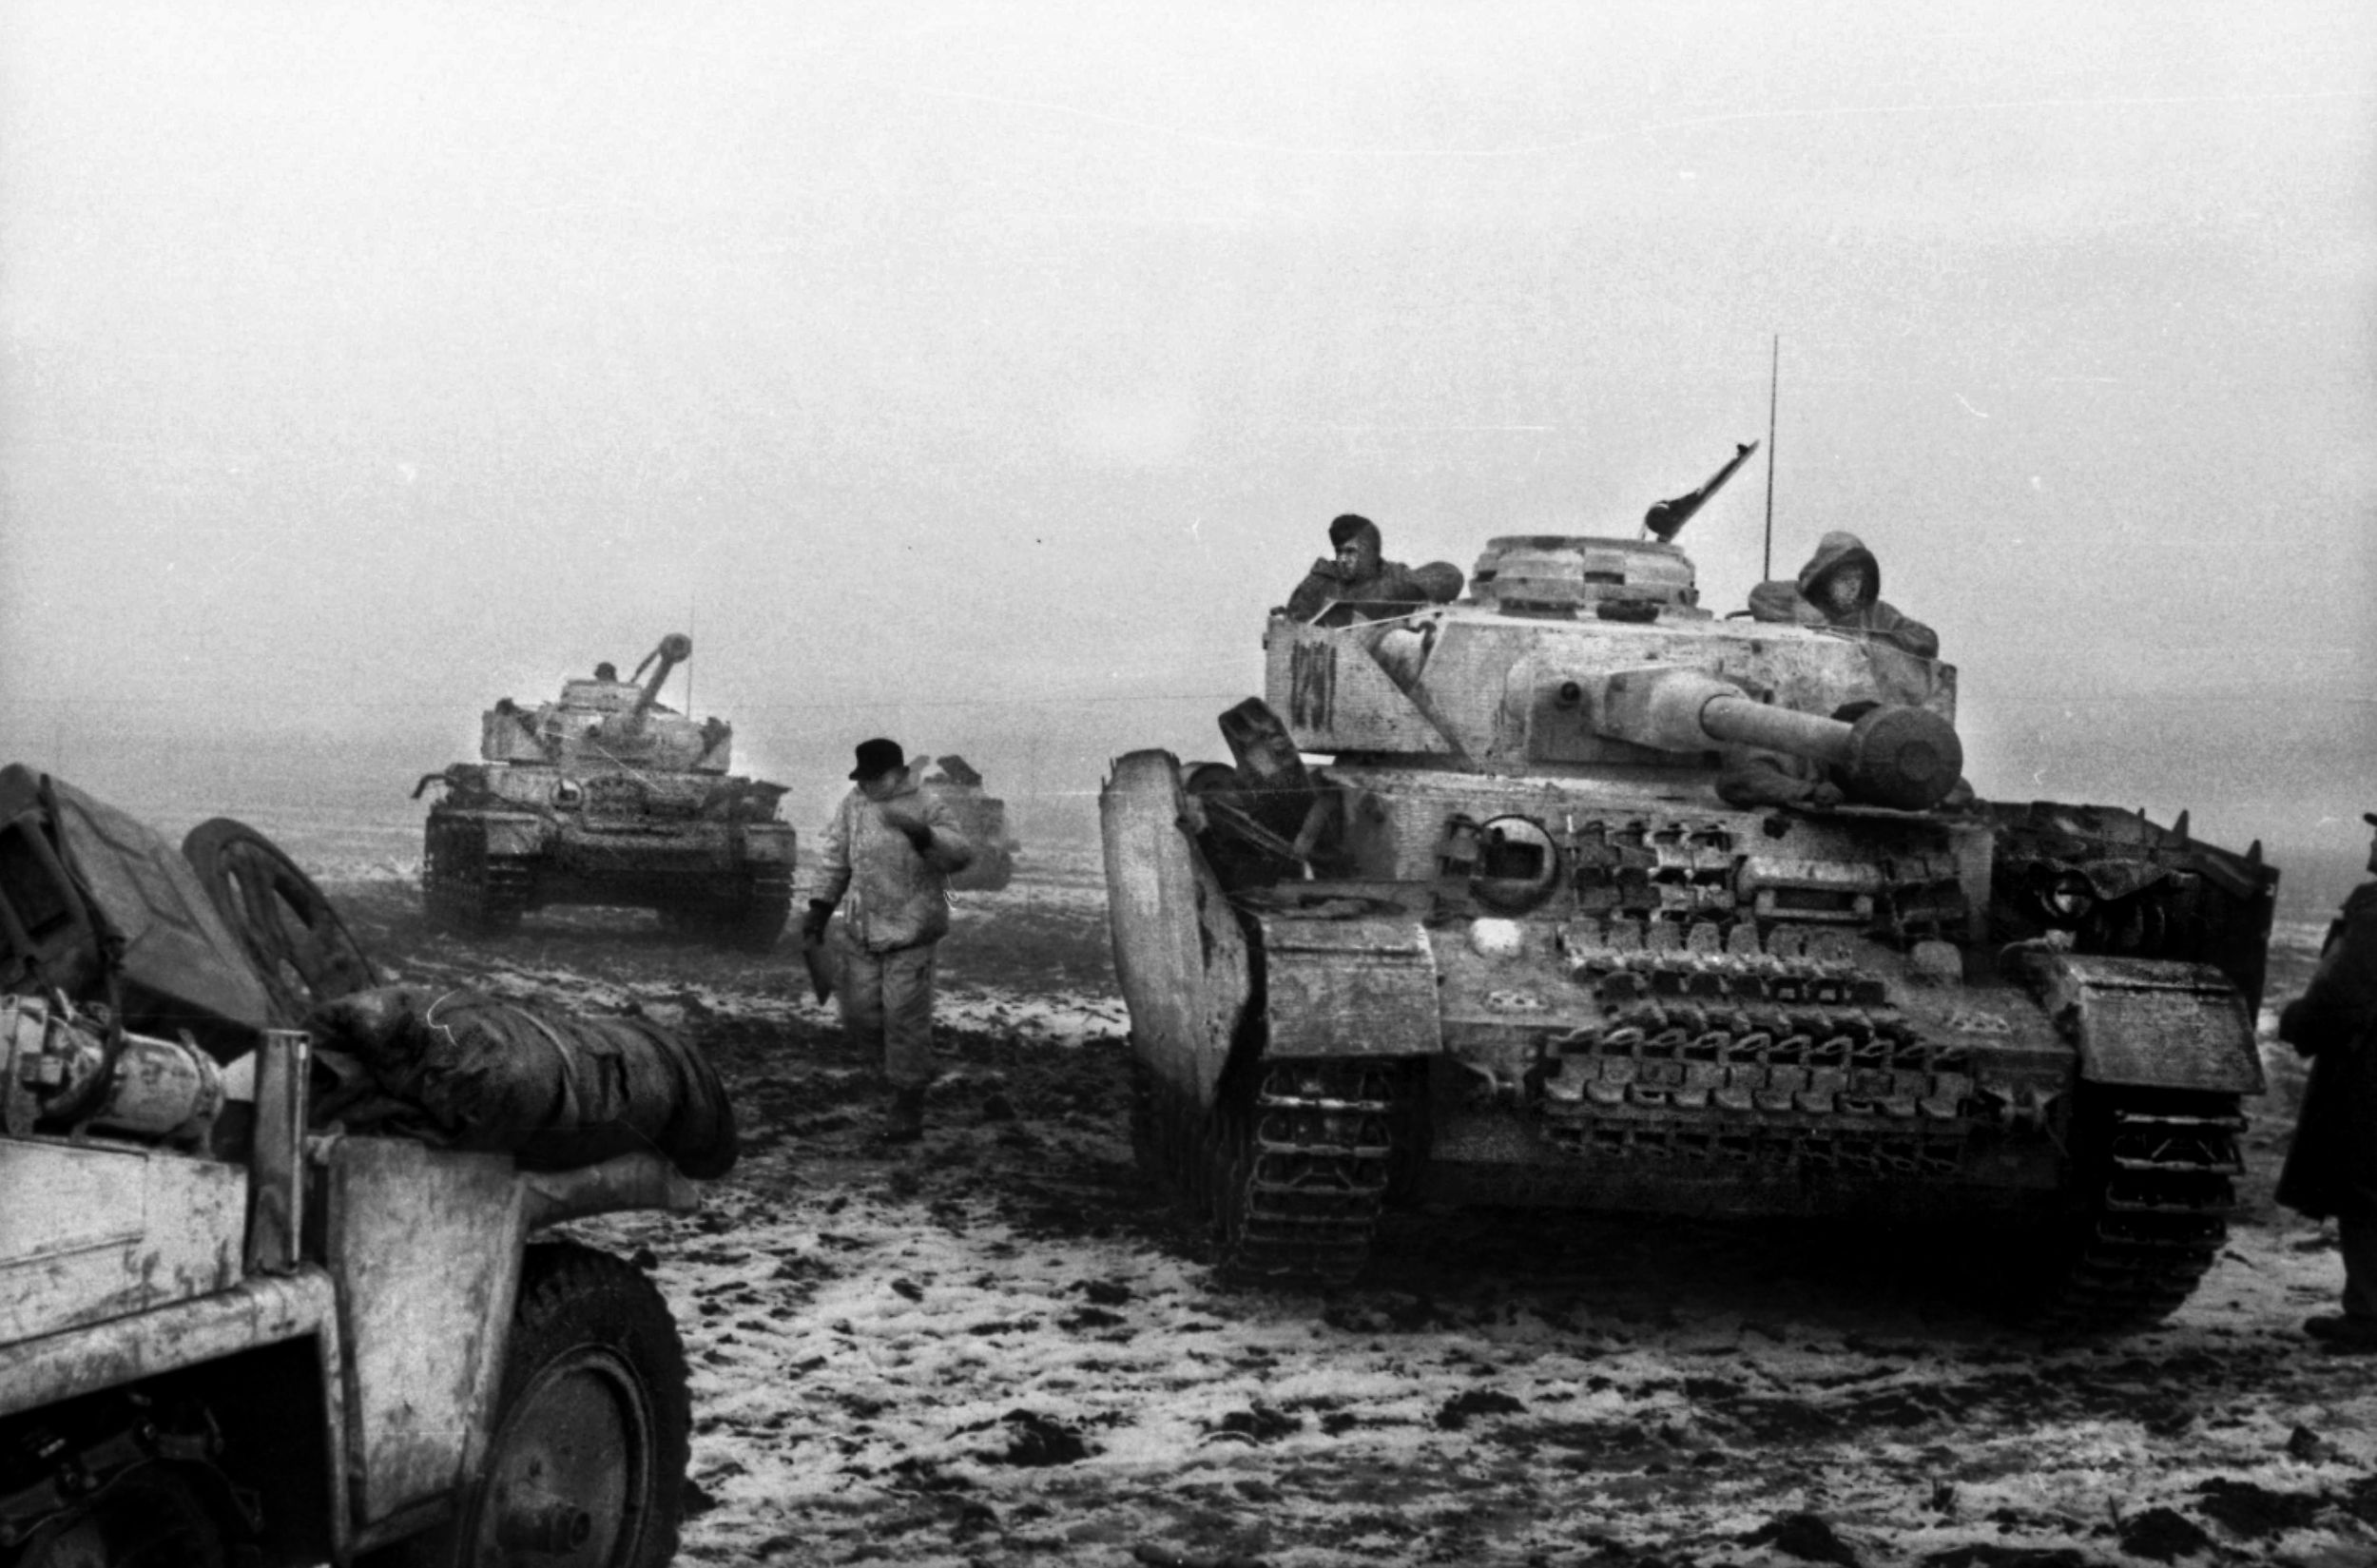 In December, 1943, German PzKpfw. IV tanks followed by panzergrenadiers make their way slowly across a bleak Ukranian landscape that might be knee-deep mud one day and ice the next. By the third week of January, the Germans would be completely surrounded by the Red Army. The lead tank has improvised armor to protect its tracks.